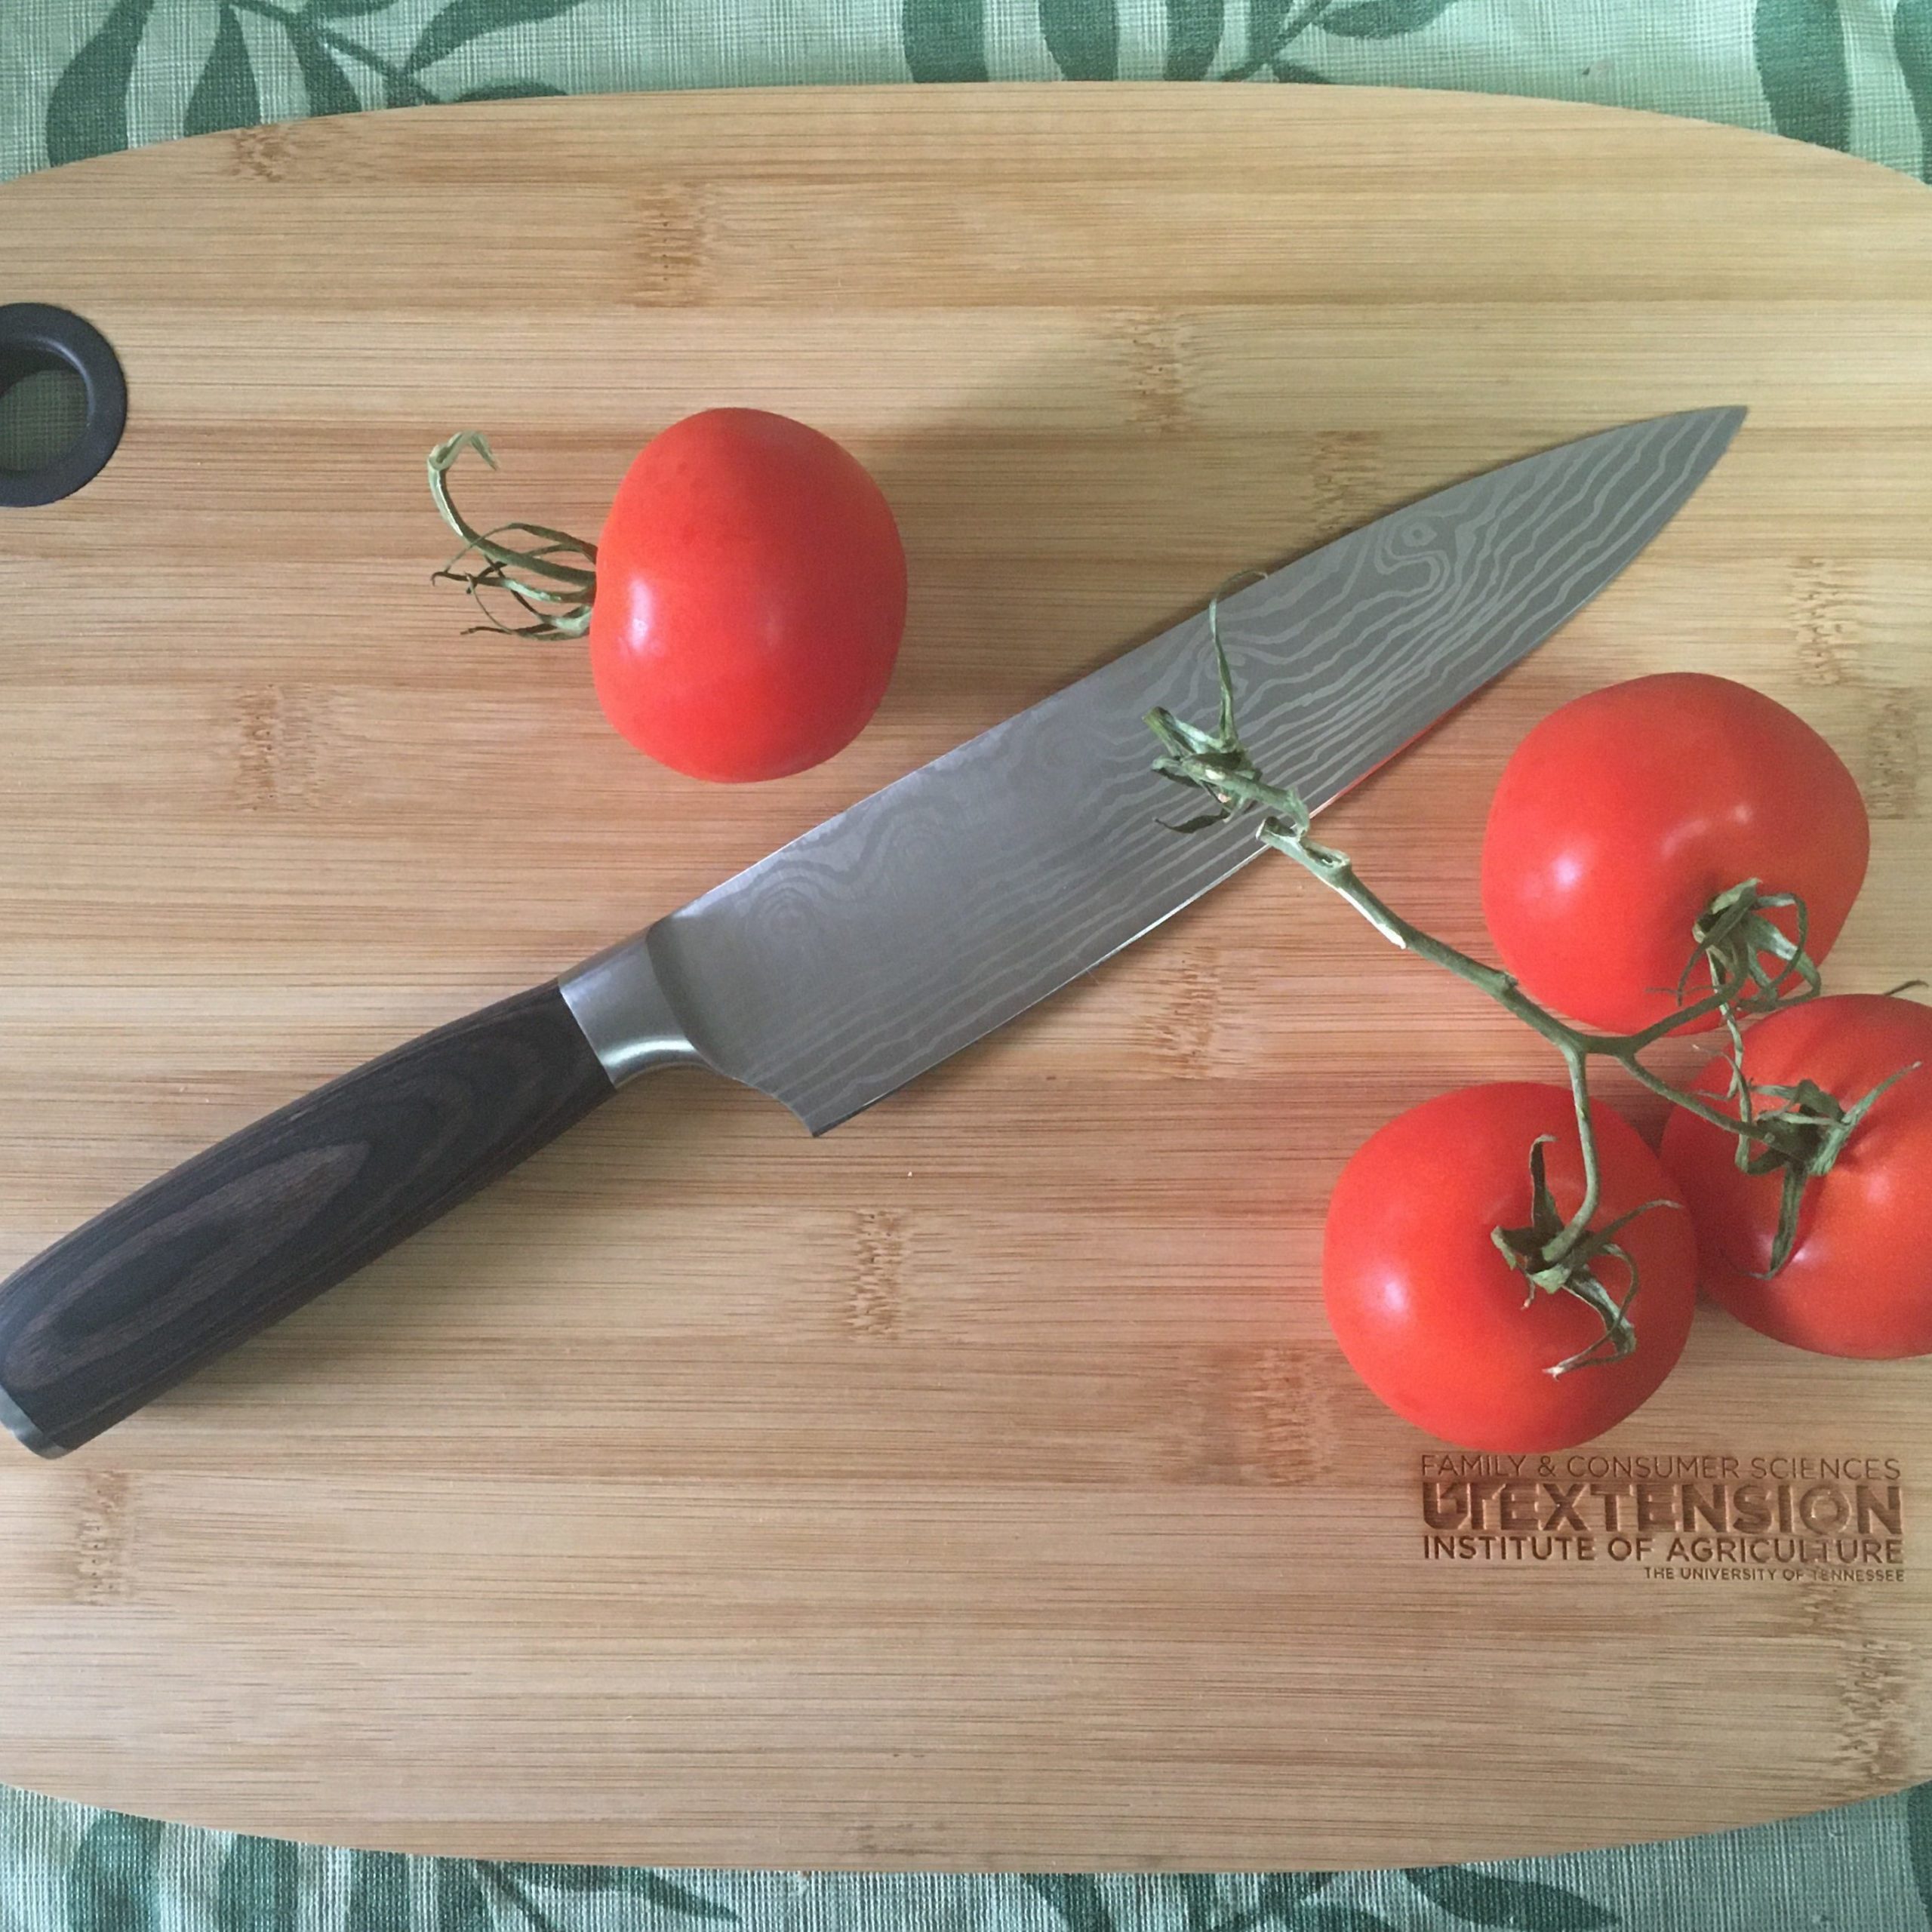 Decorative Image: Cutting board with a knife and tomatoes 